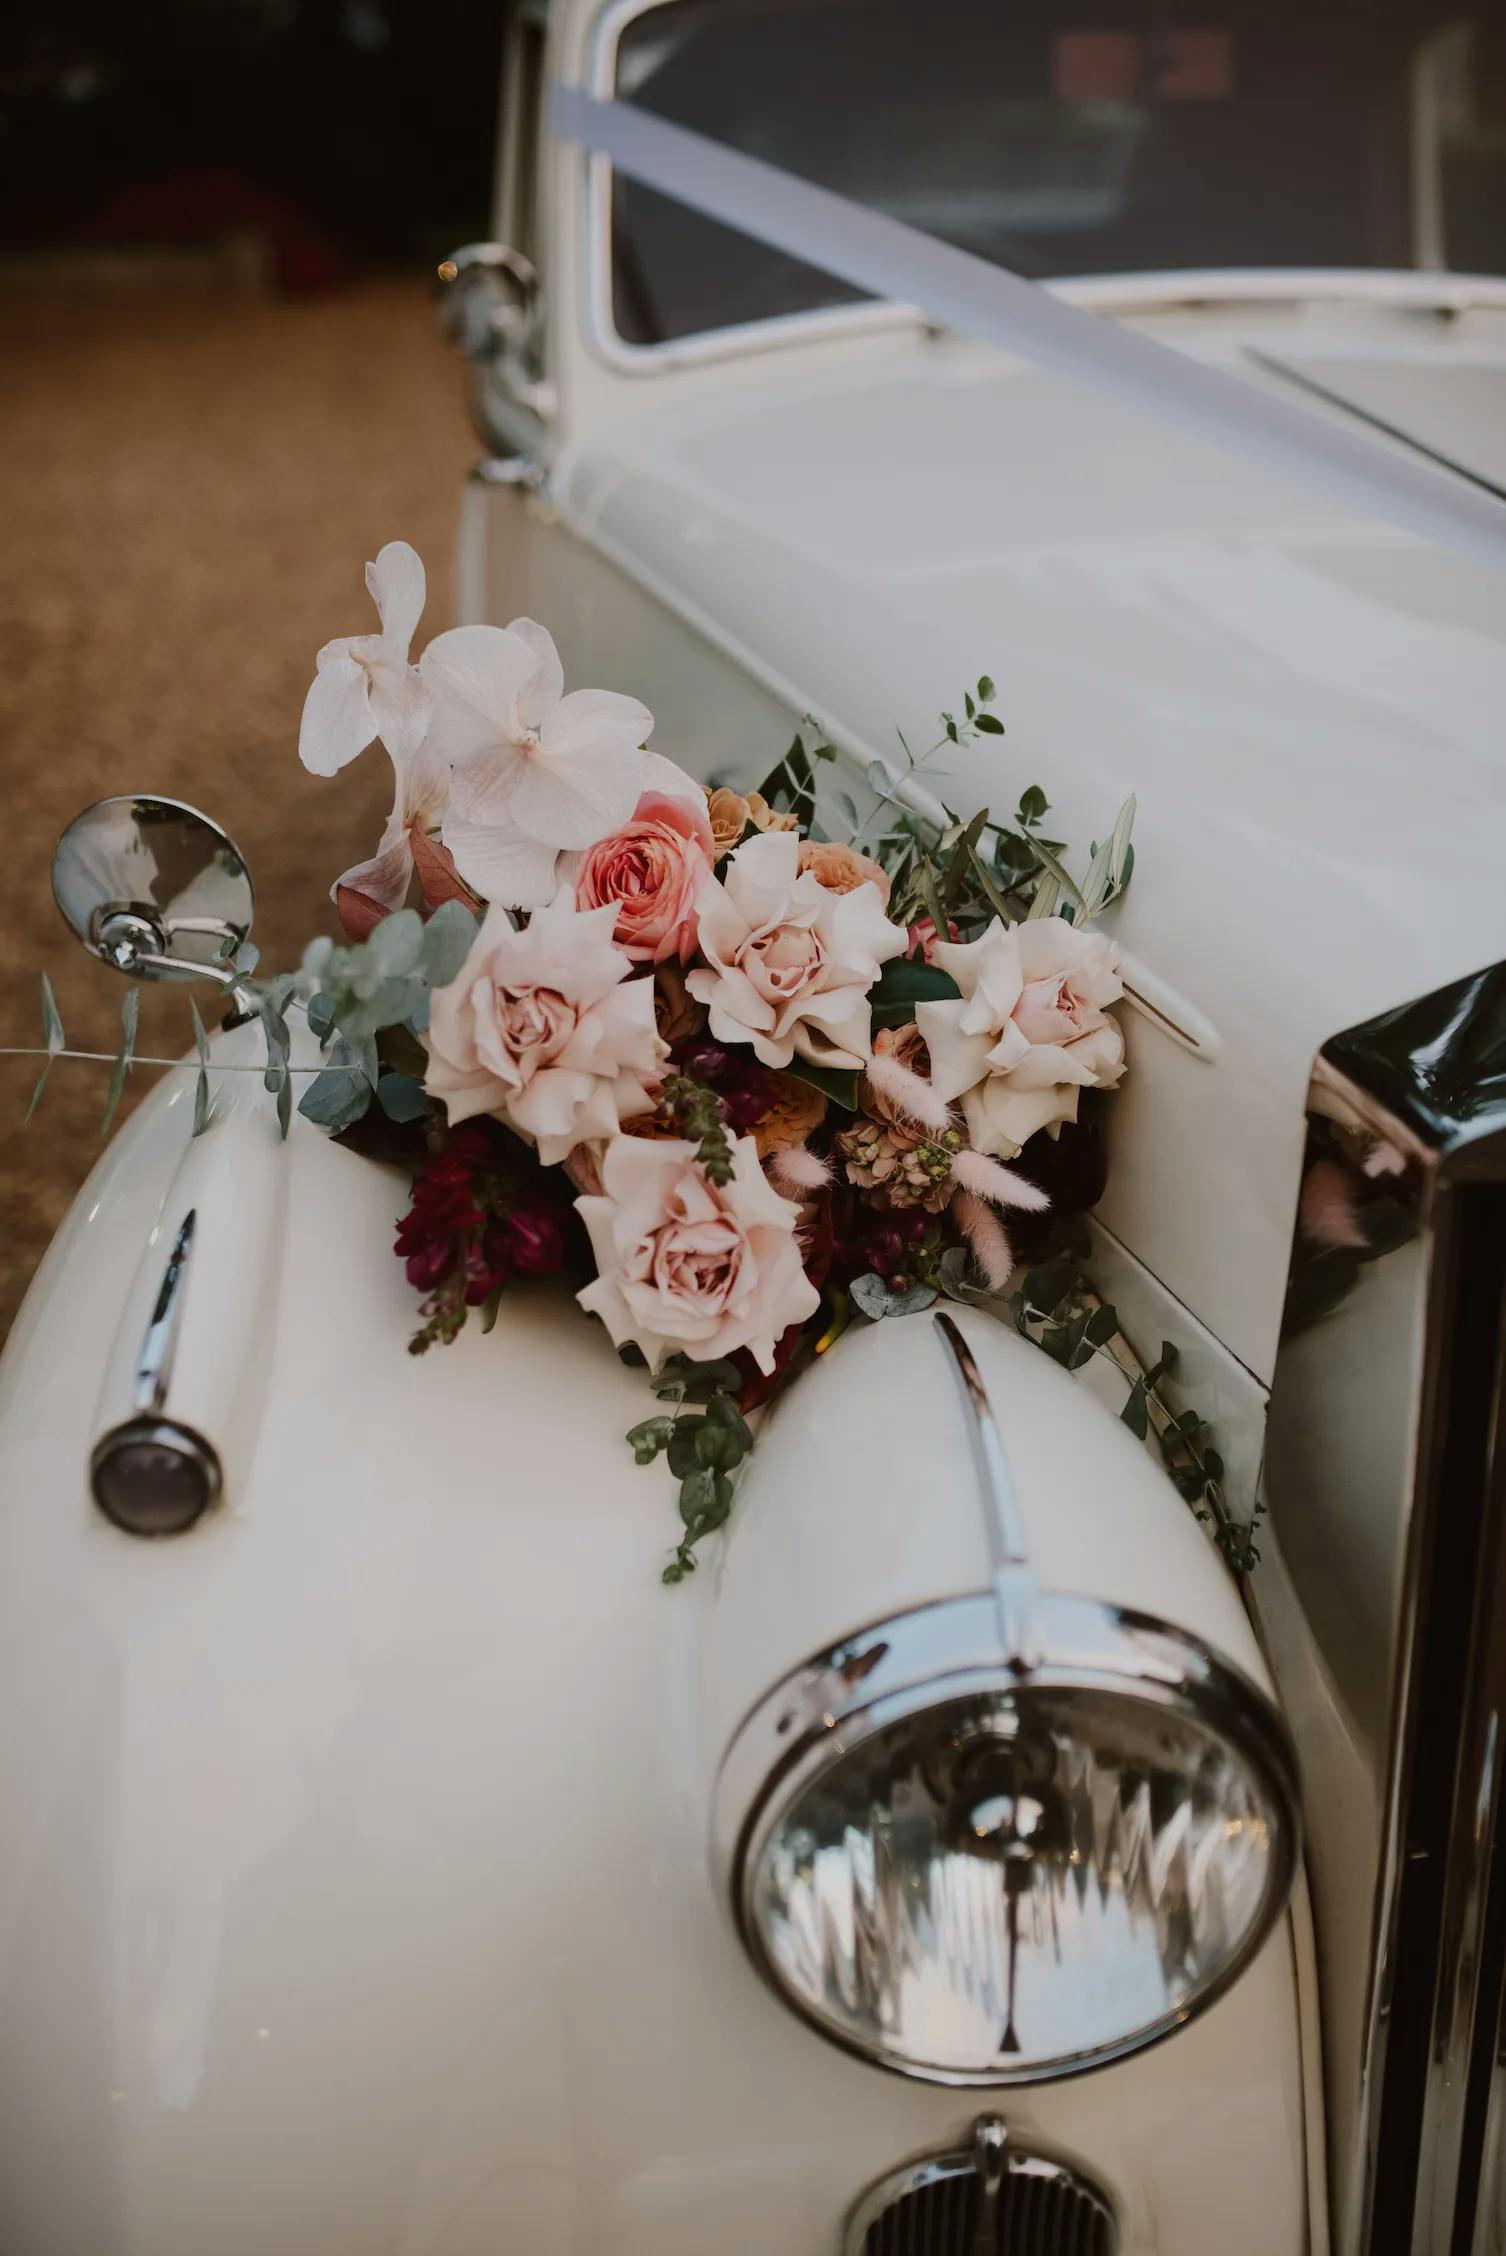 A vintage white car is adorned with a bouquet of pink and white roses along with greenery on the front hood, near the headlight. The car has a satin ribbon attached, suggesting it is decorated for a wedding or special event.